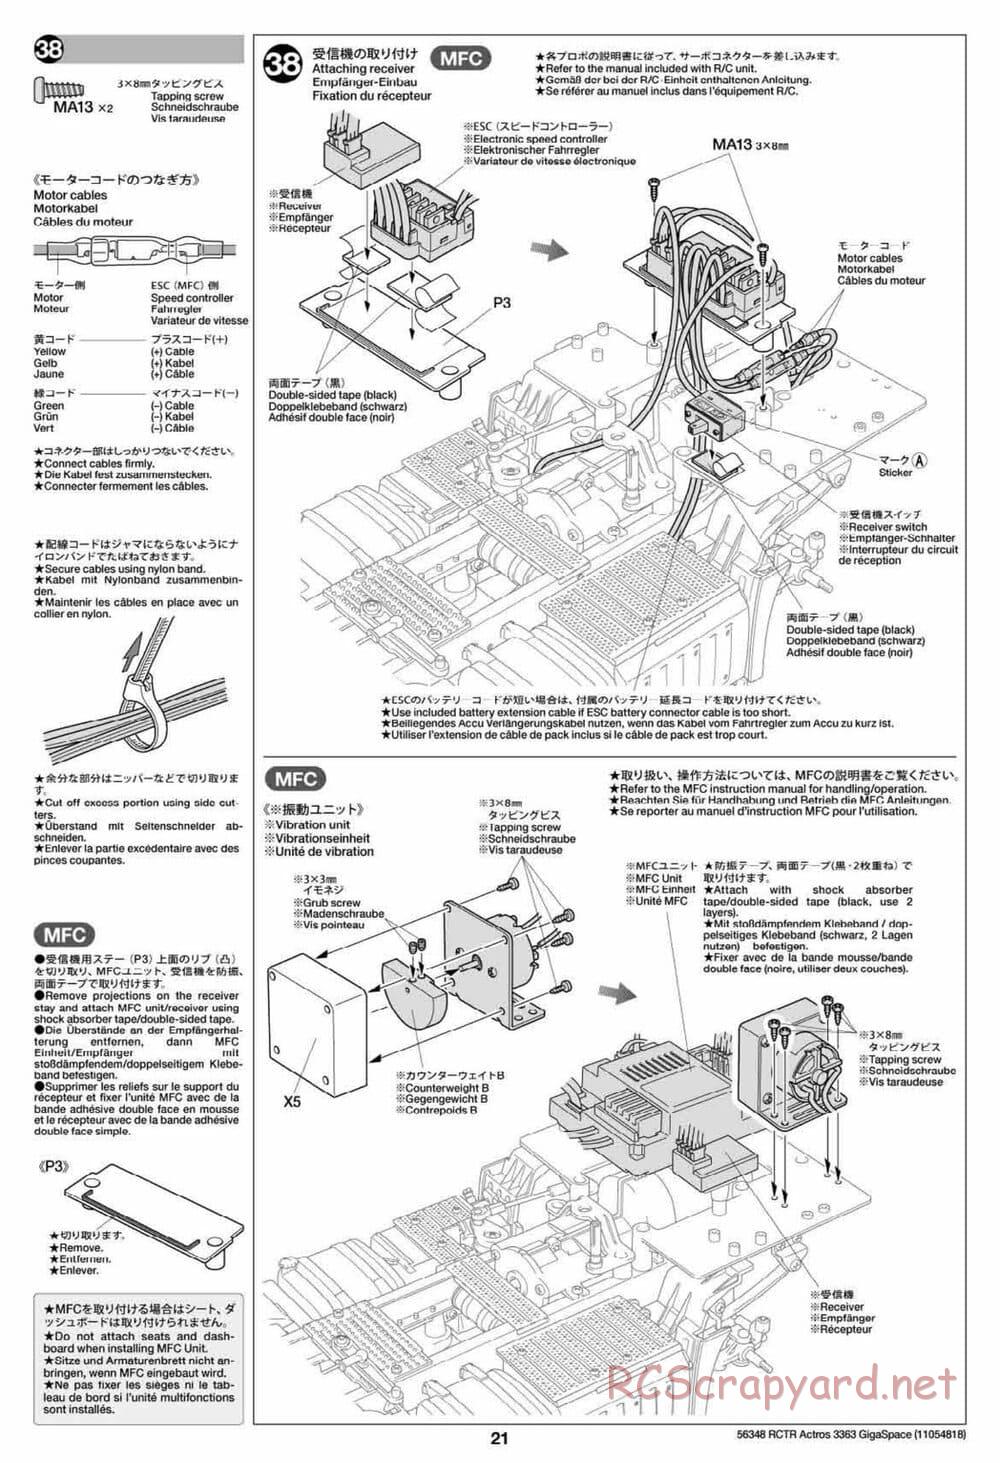 Tamiya - Mercedes-Benz Actros 3363 6x4 GigaSpace Tractor Truck Chassis - Manual - Page 21